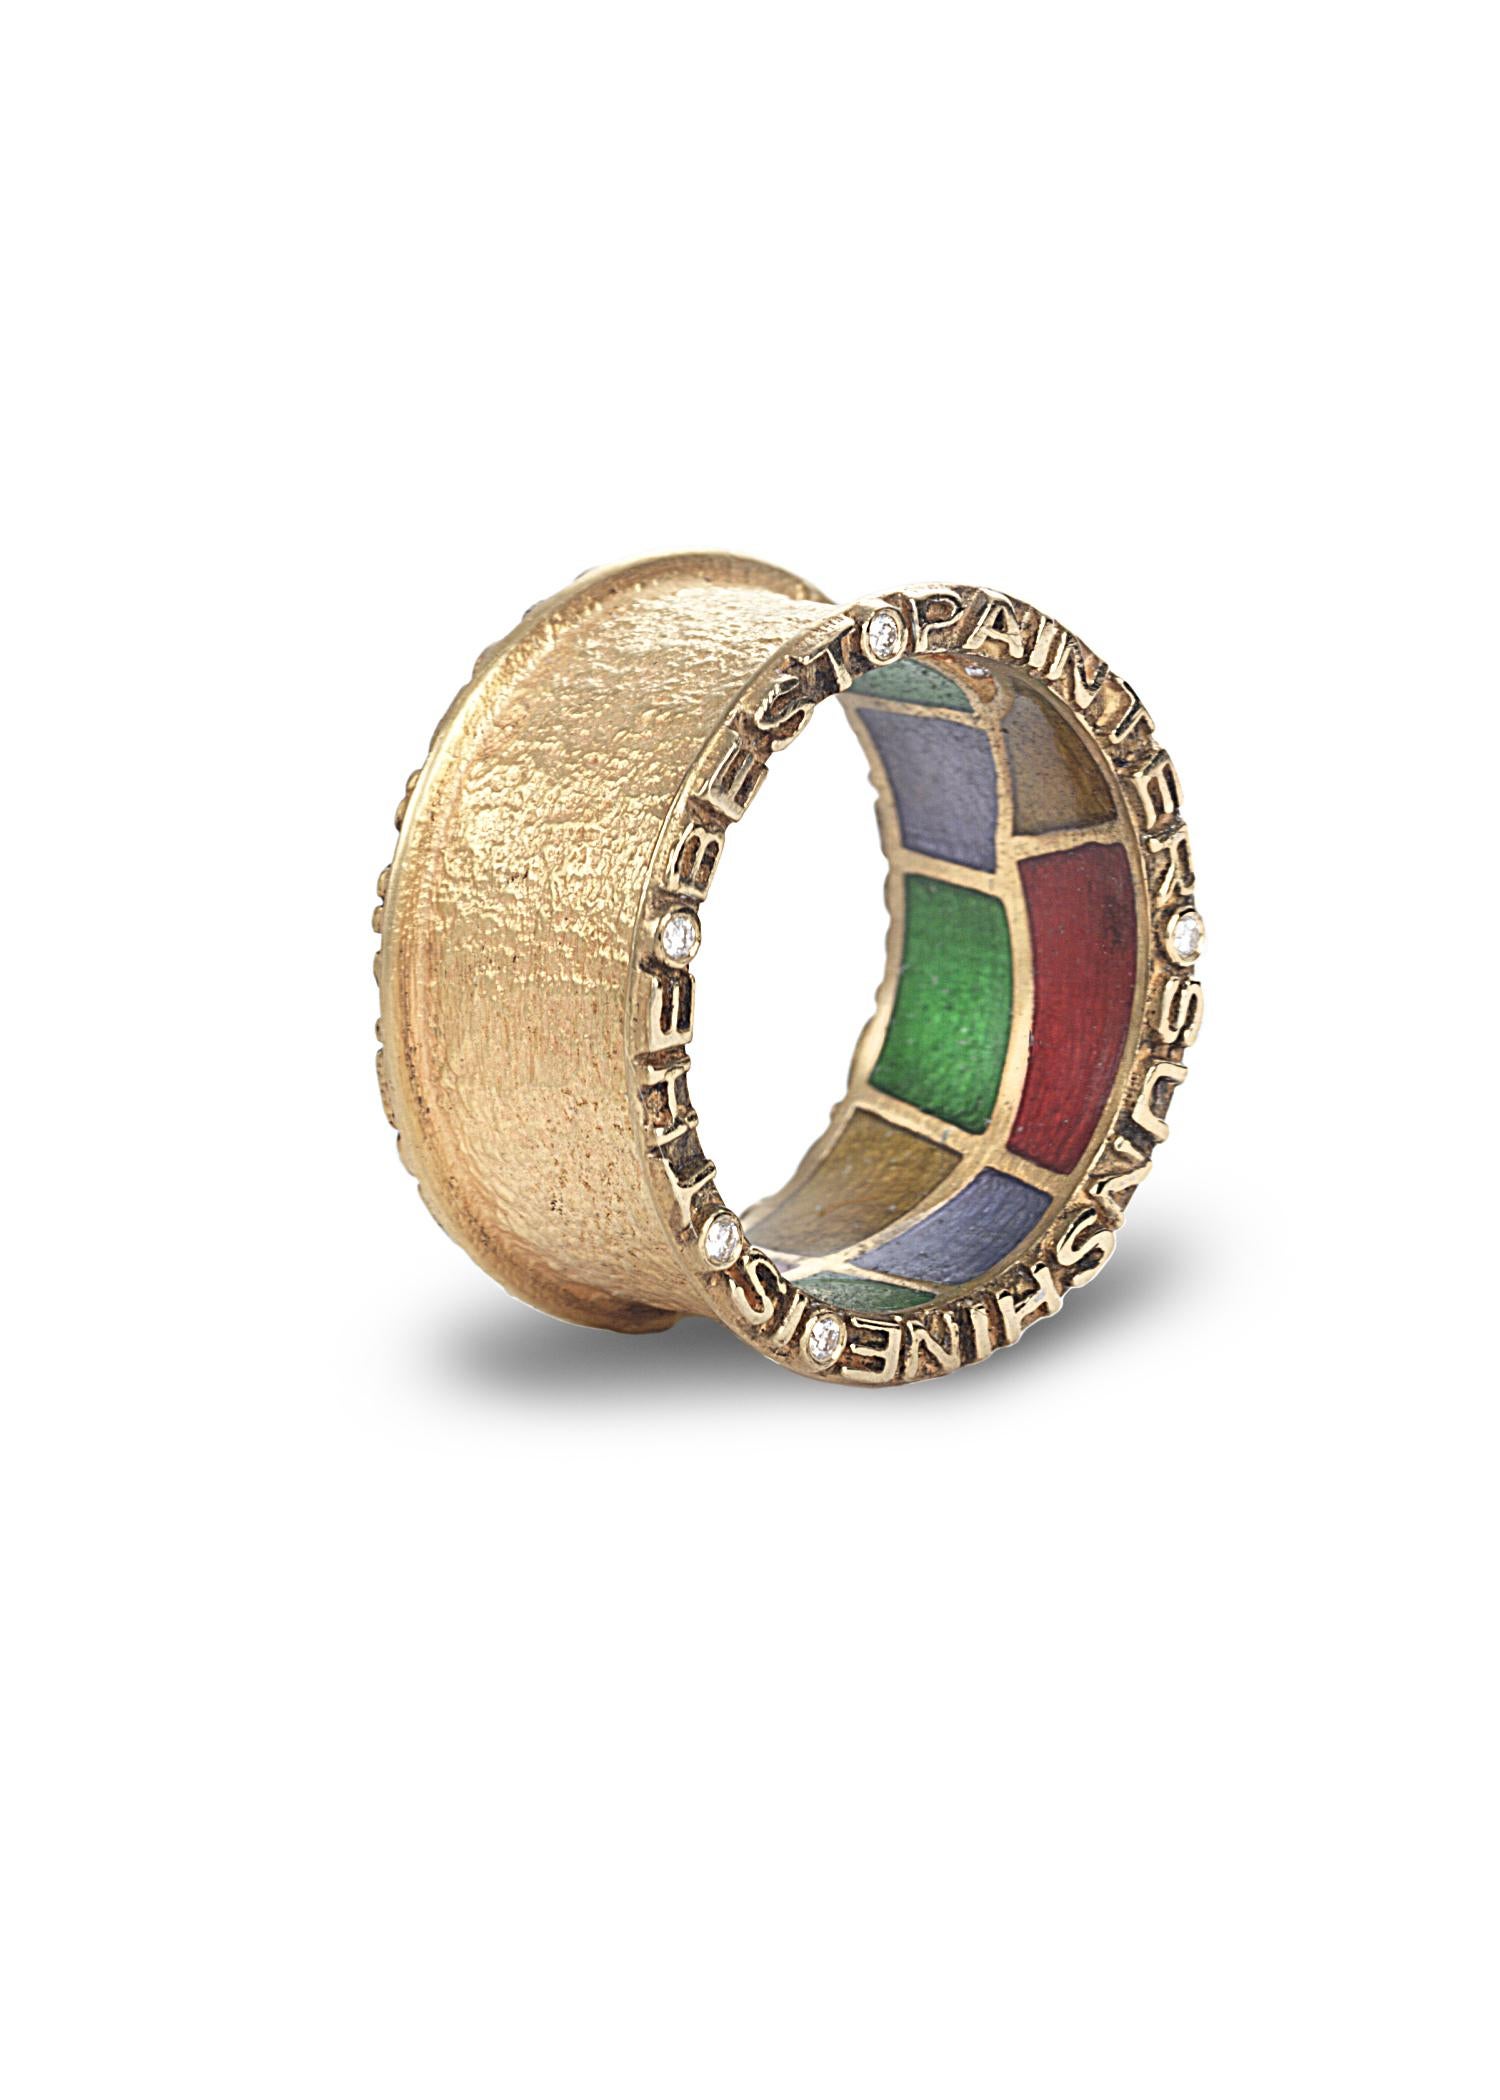 Hand made Coomi Sagrada collection band ring set in 20K yellow gold with 0.10cts diamond accents and stained glass-like multicolor enamel gallery. 

Famous Antonio Gaudi quotes 